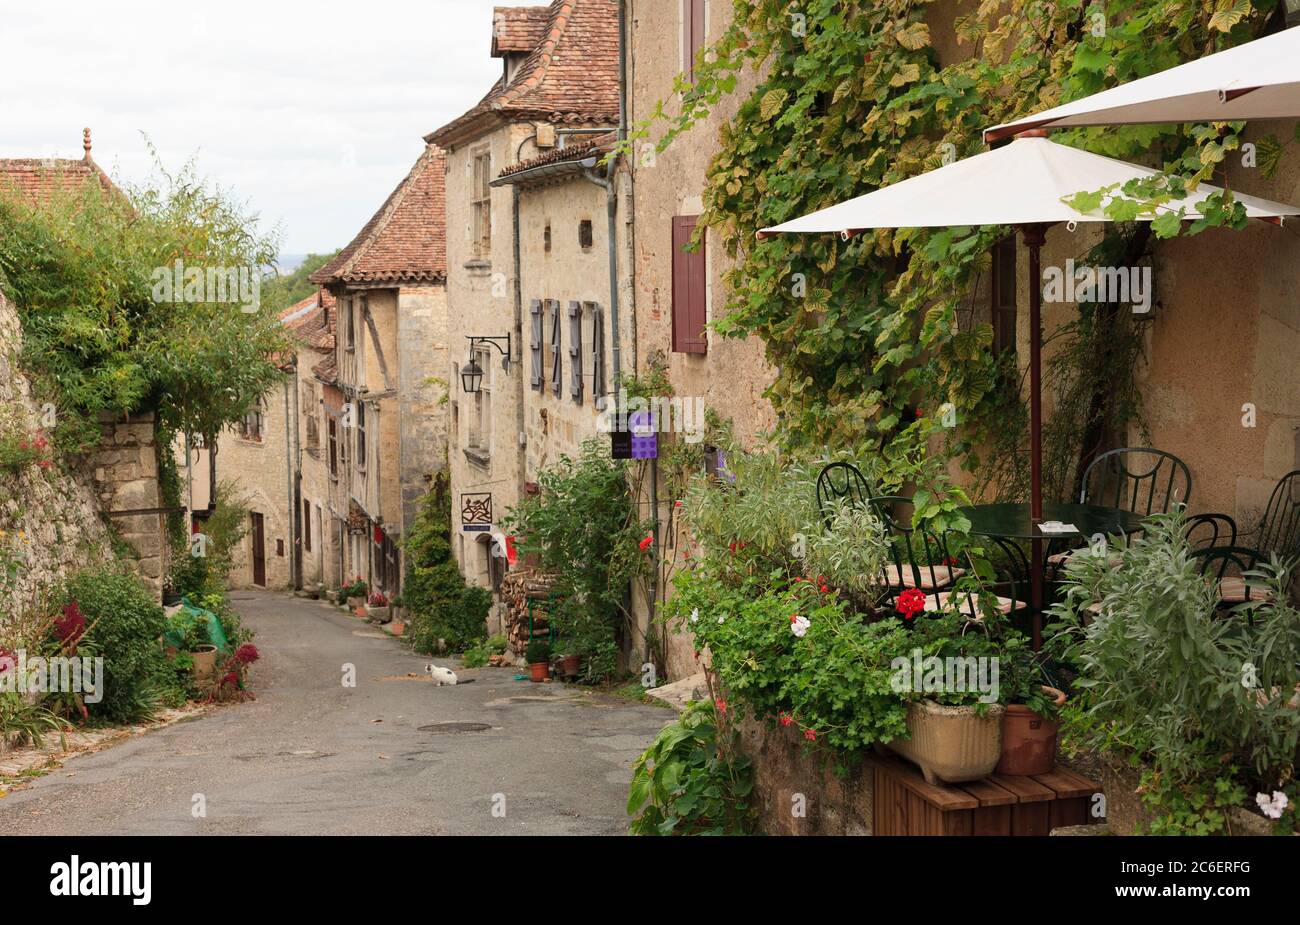 Old cliffside town, a member of 'The most beautiful villages of France', Saint-Cirq-Lapopie, France Stock Photo